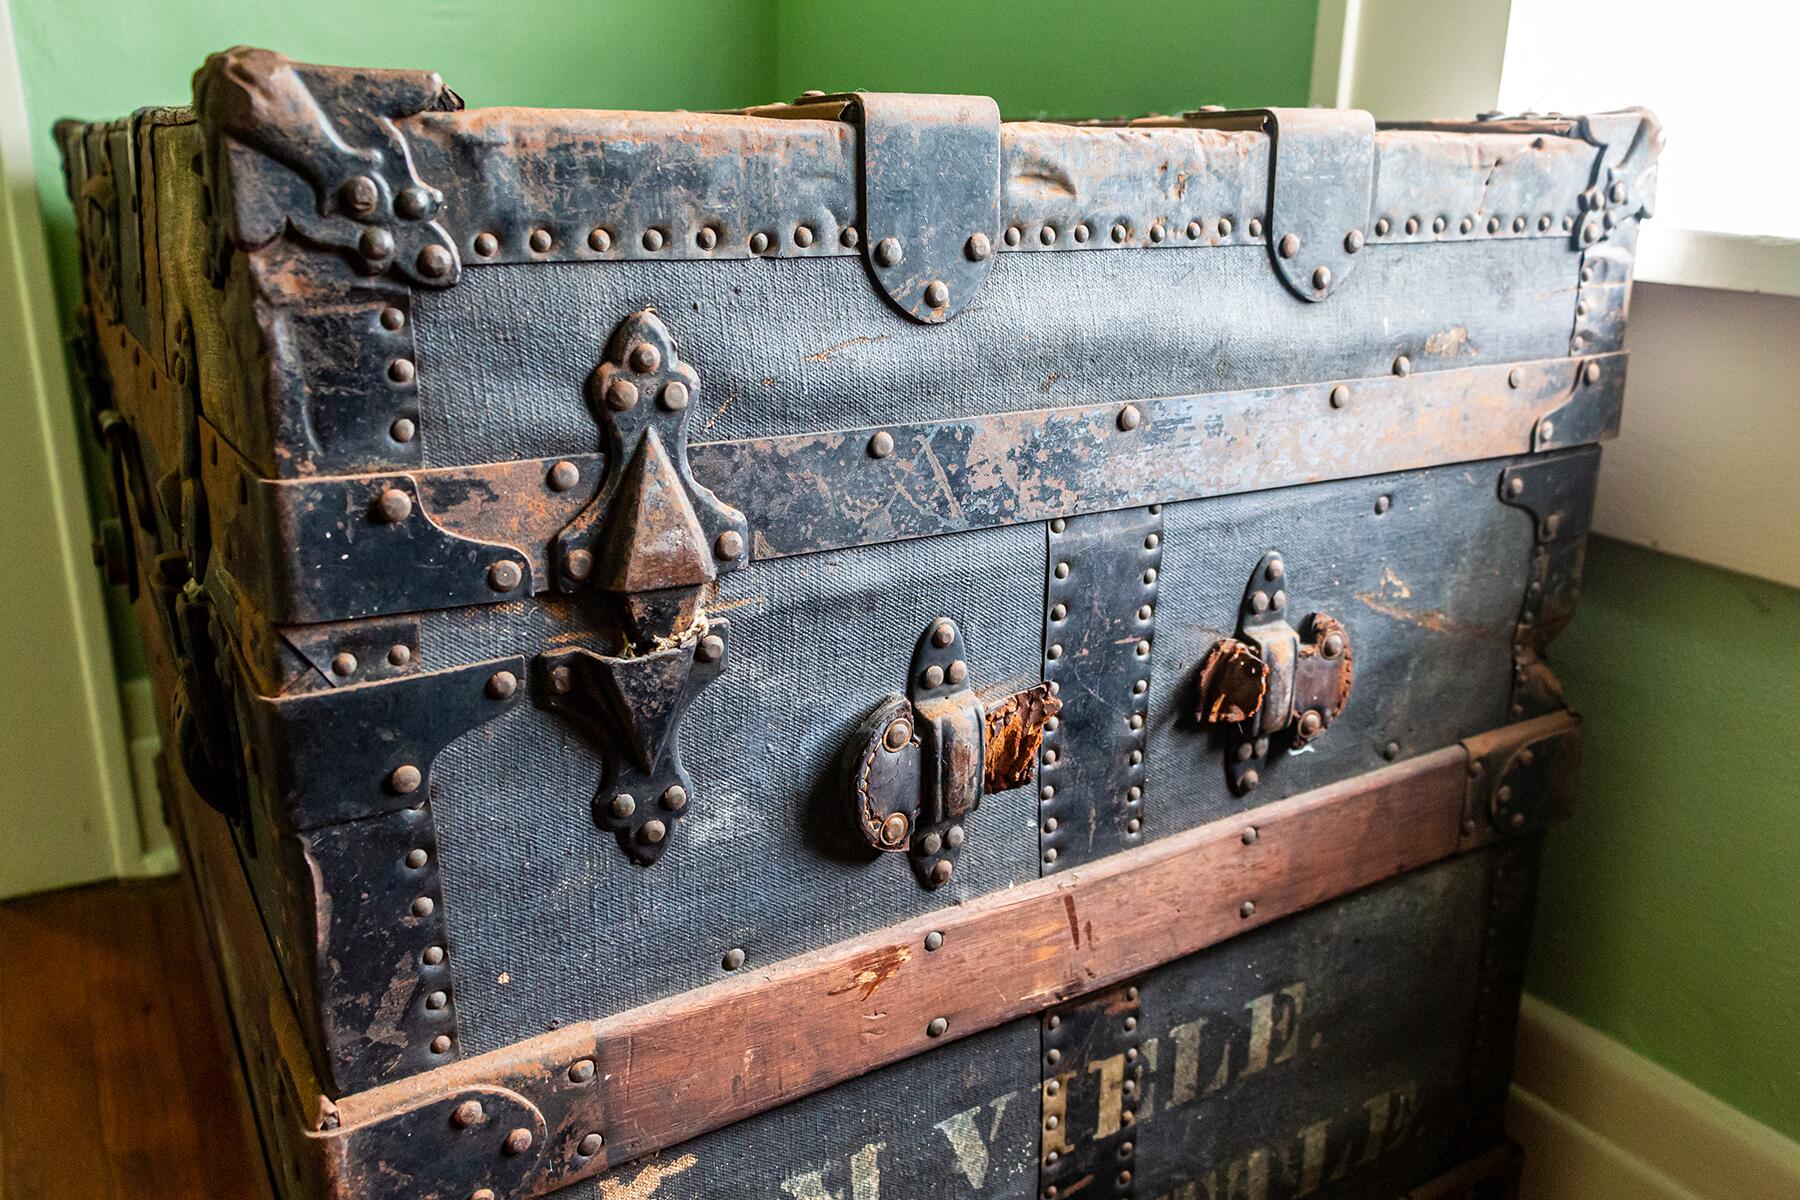 Where Does Luggage Come From? We Look at the History of the Suitcase